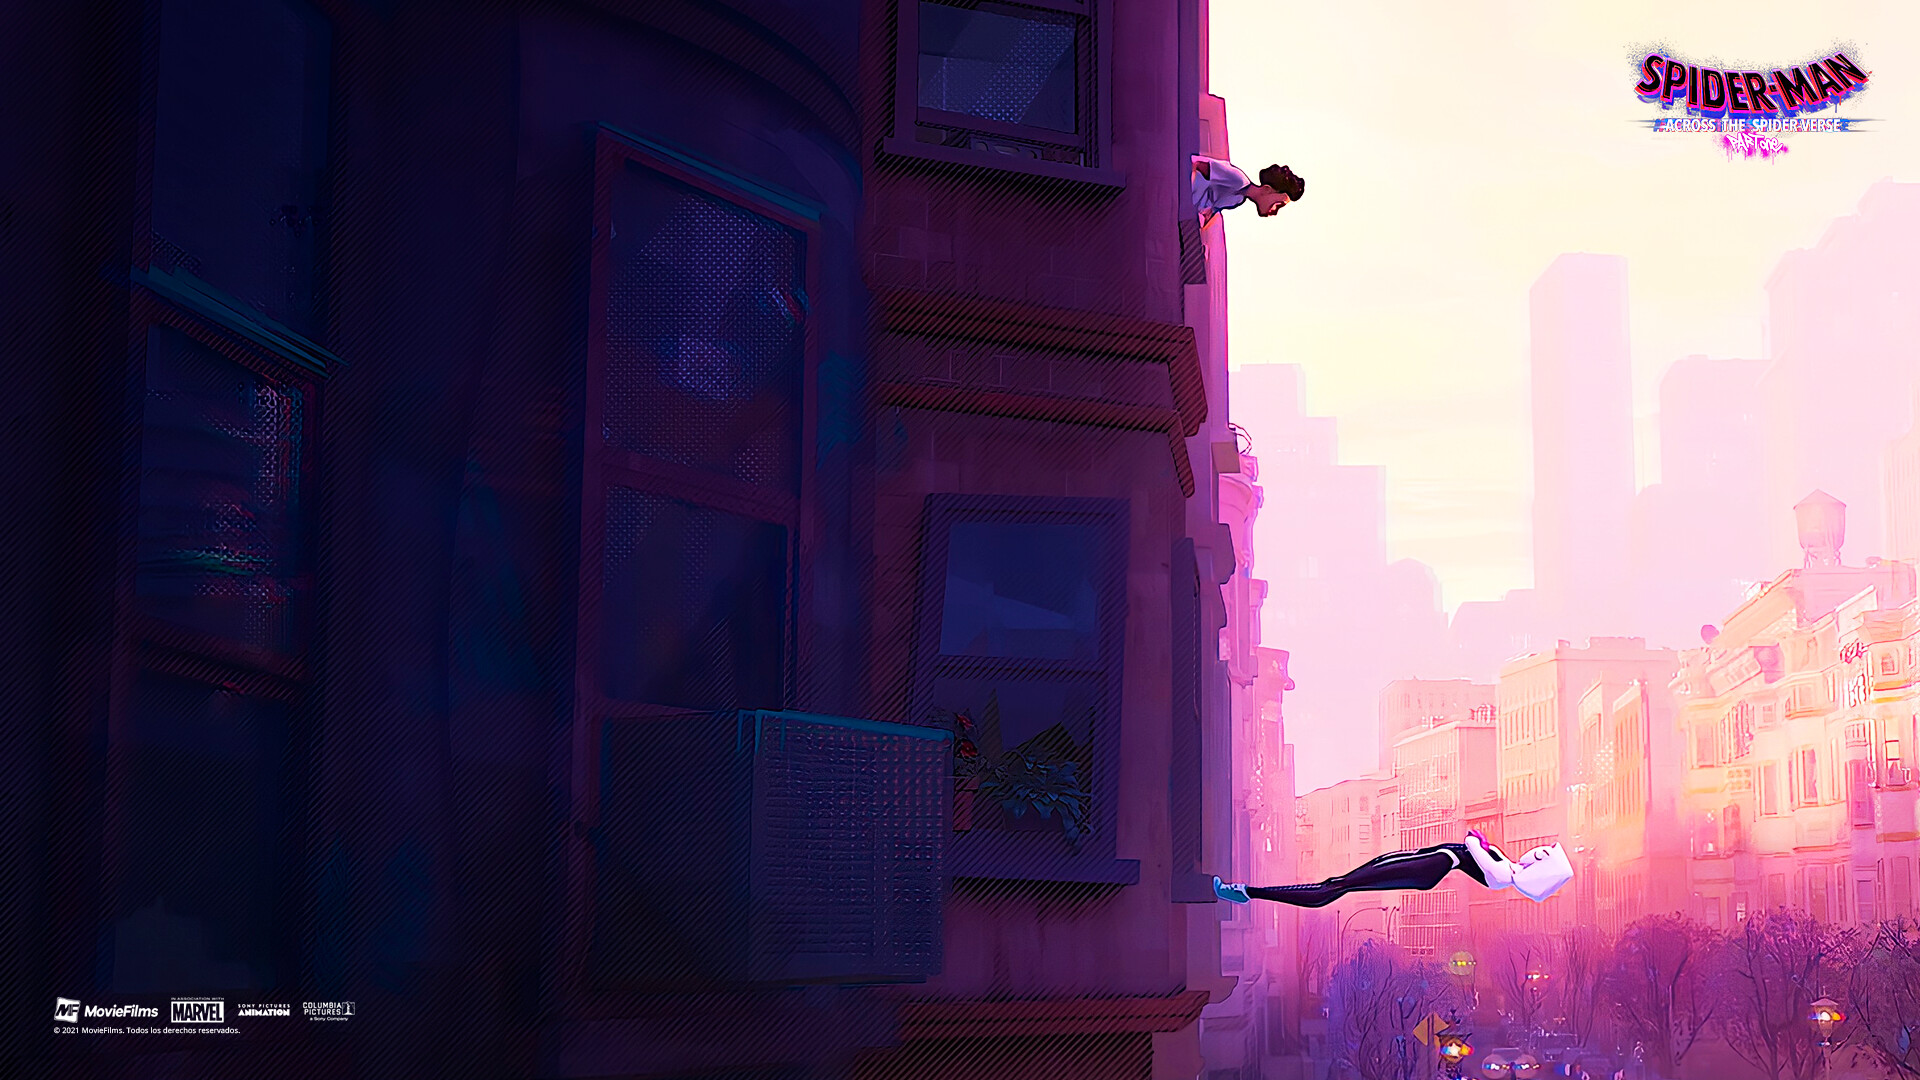 Spider-Man: Across the Spider-Verse - Part One: Gwen Stacy / Spider-Woman, Hailee Steinfeld, Voice cast. 1920x1080 Full HD Wallpaper.